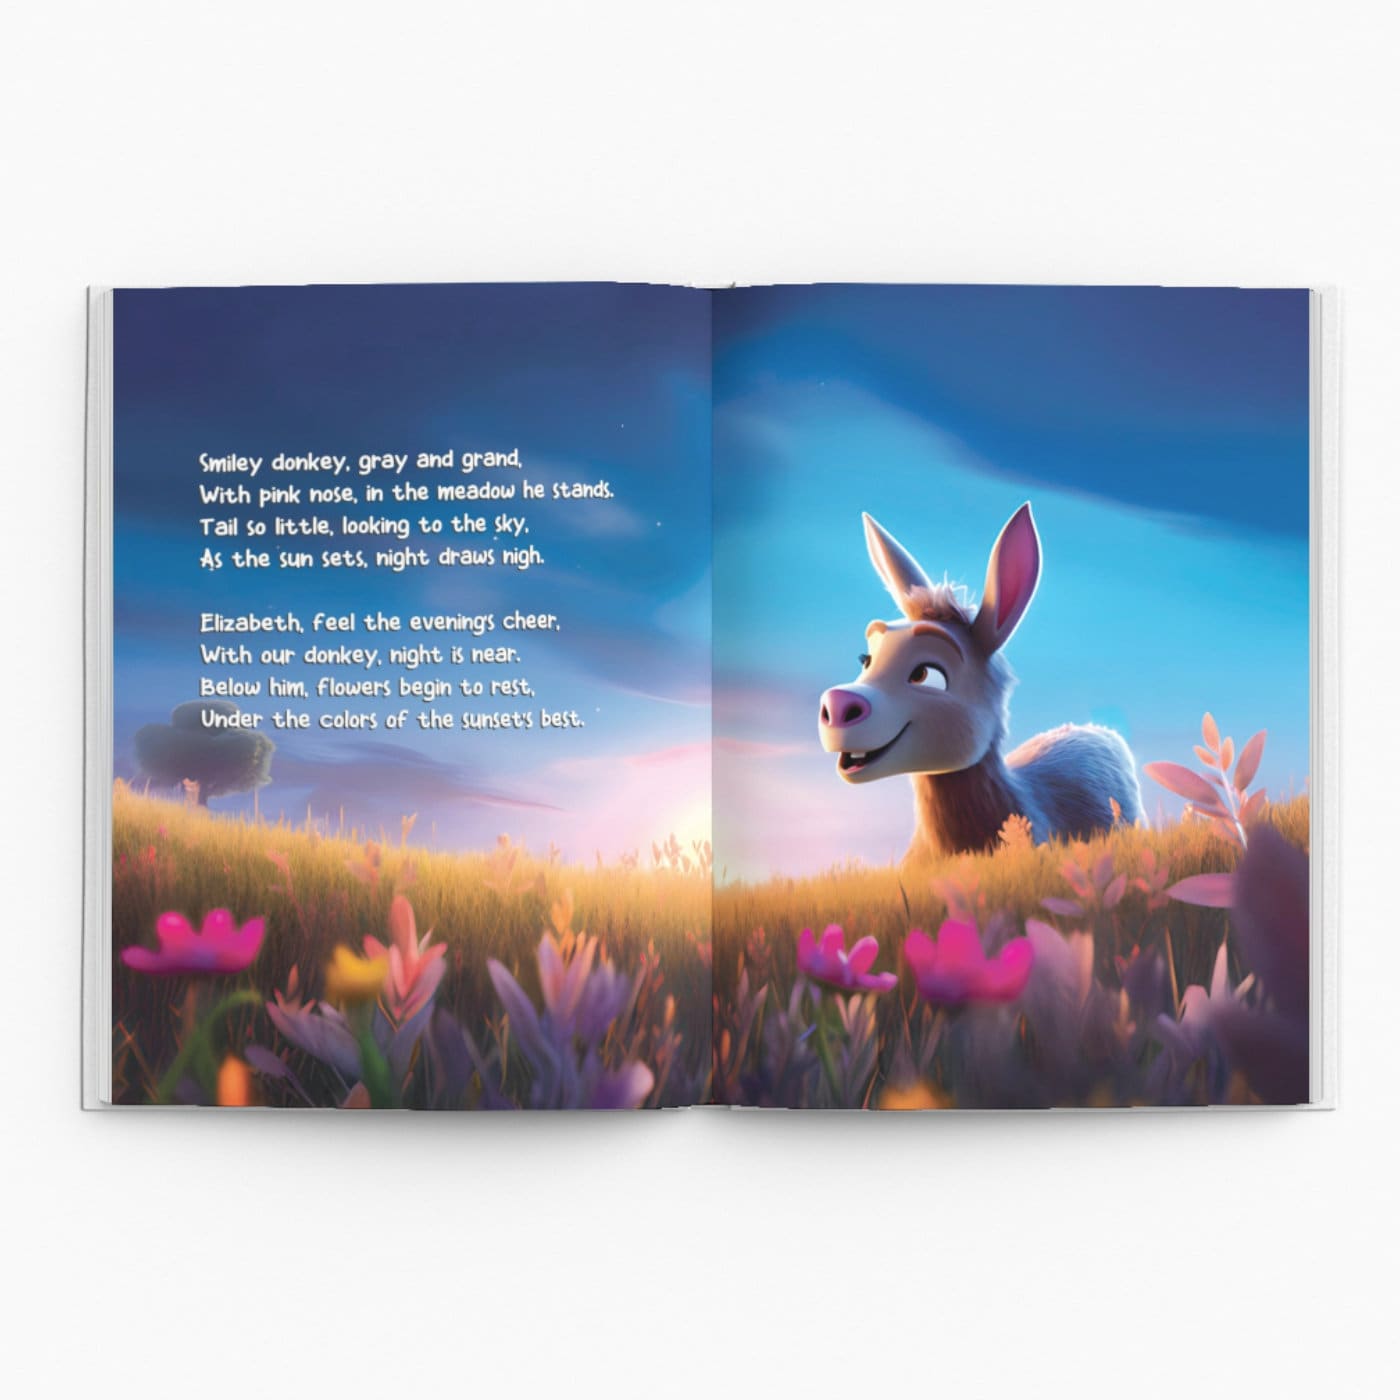 Baby Gift, Personalized Children's Book with Farm Animals, Custom Name Book, Sweet Dreams Little Name, Bedtime Book, Book with 30 Pages